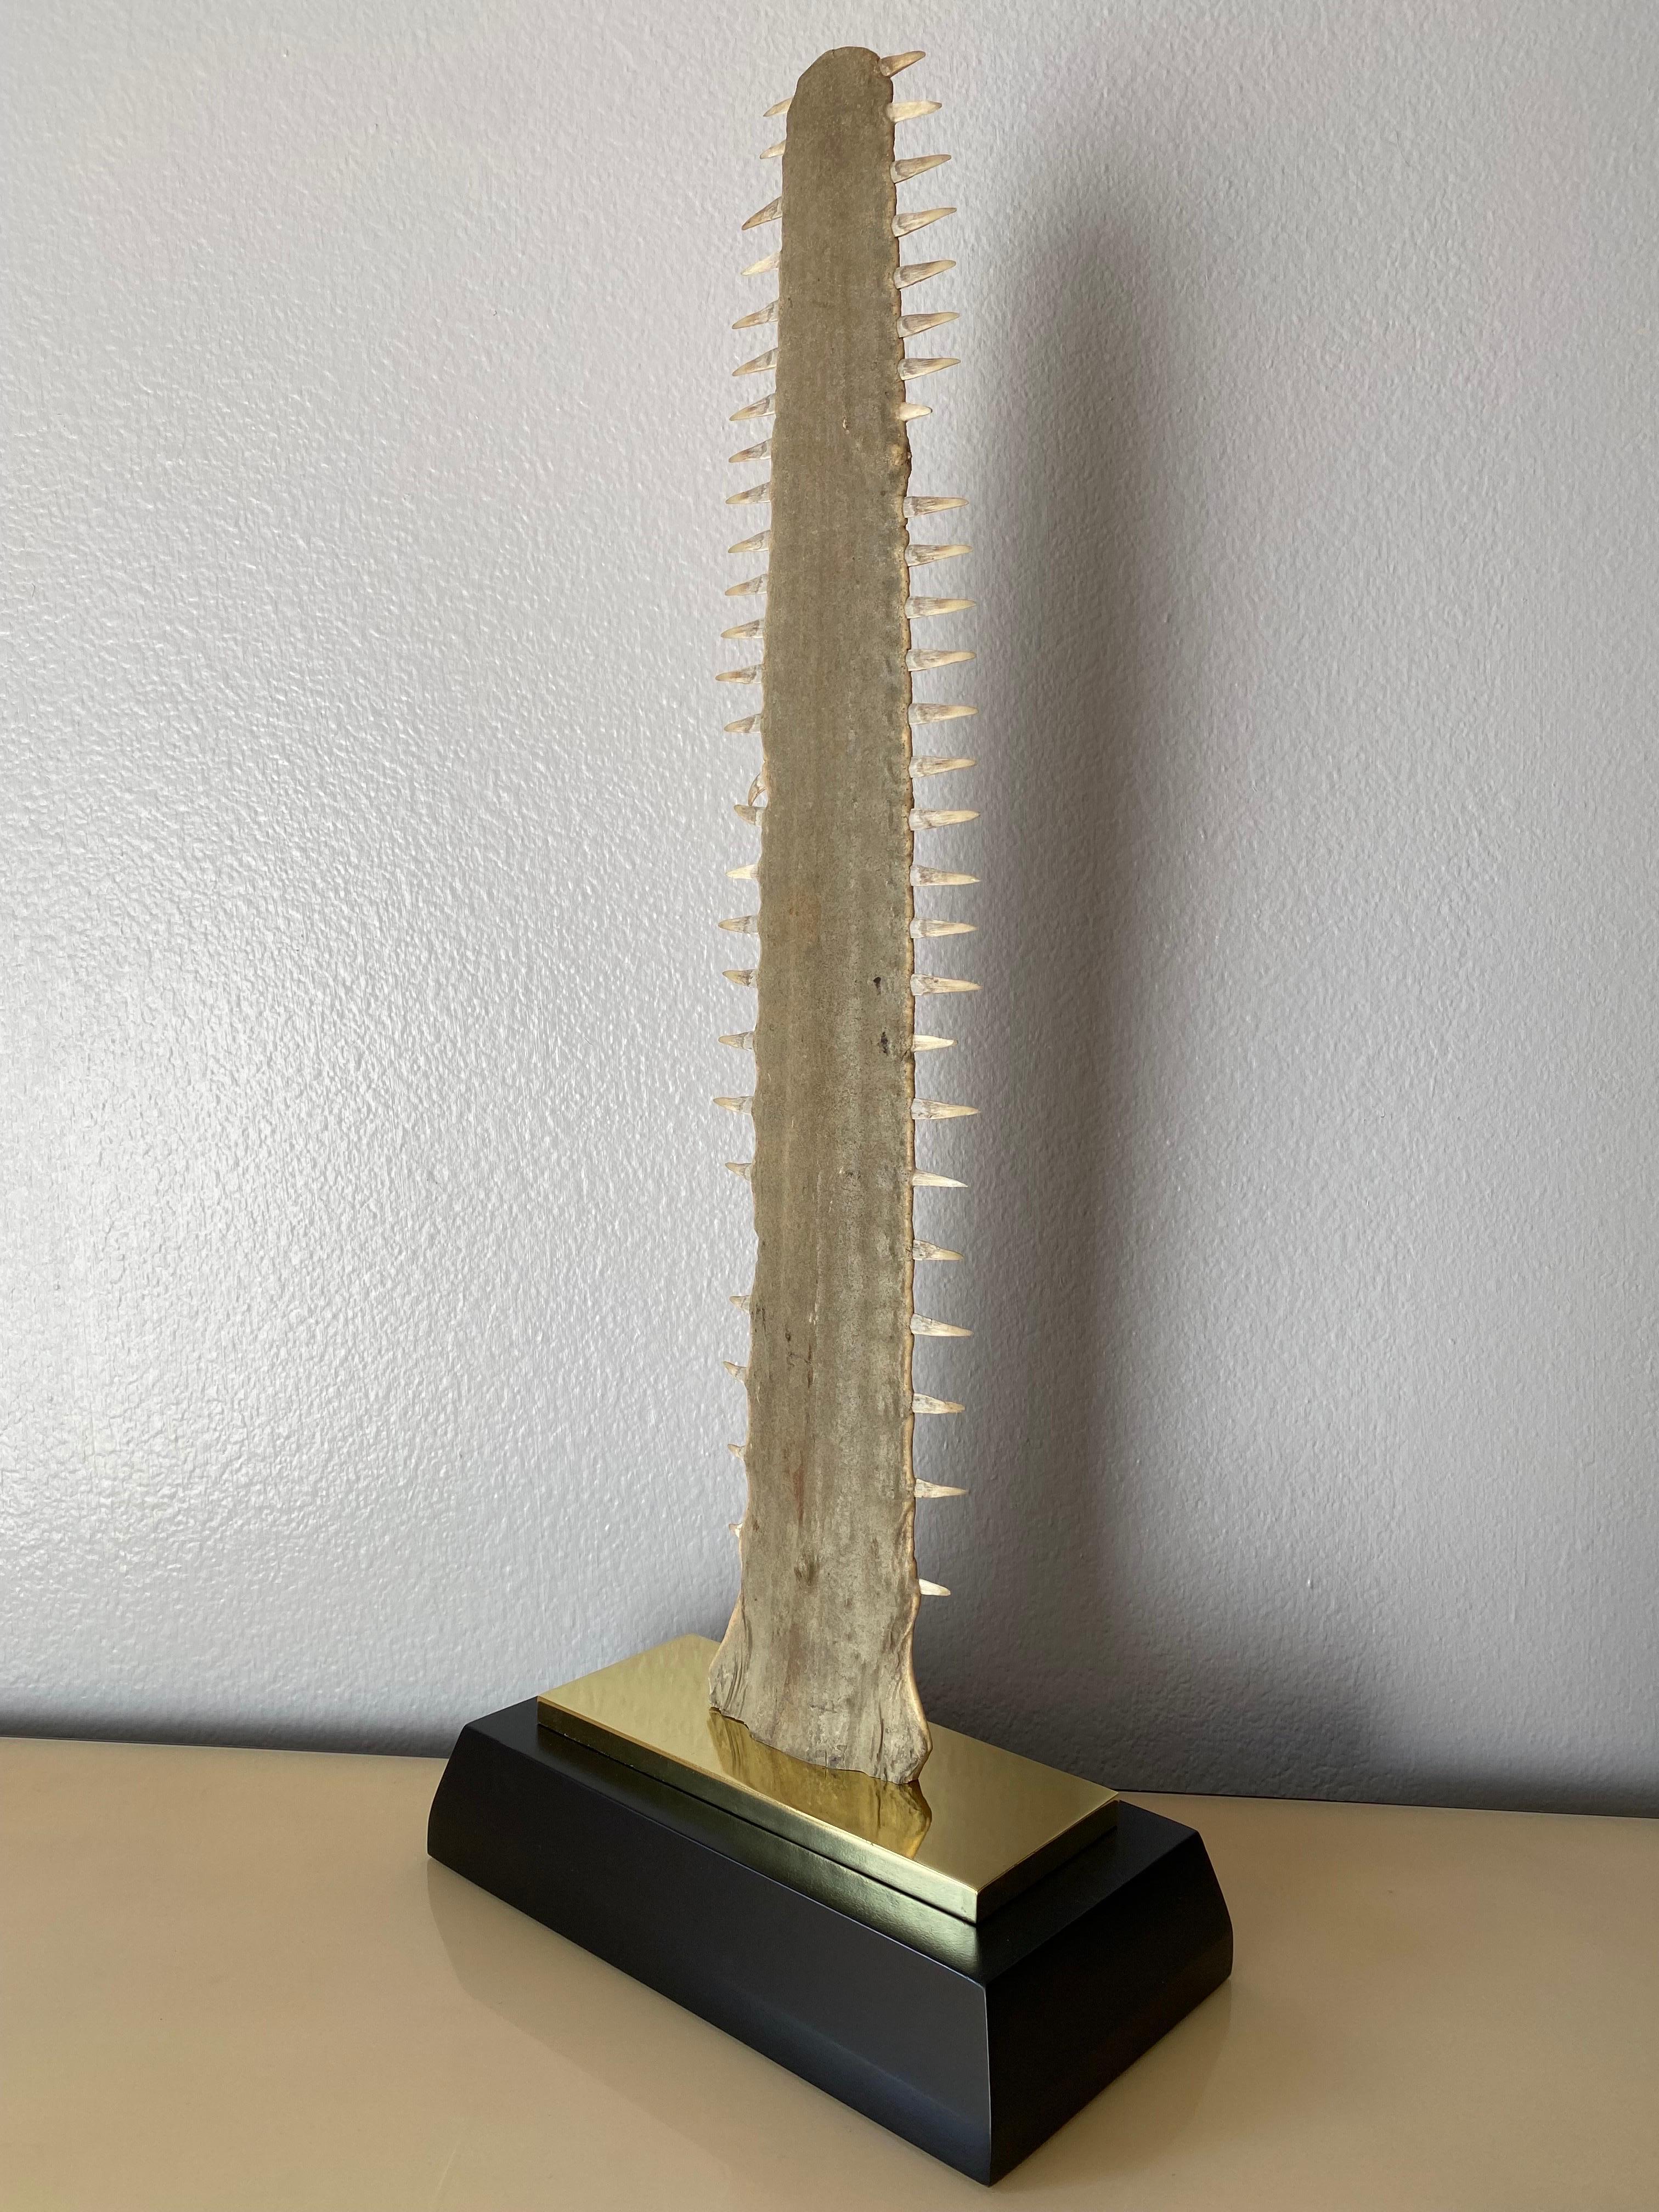 Sawfish rostrum / bill in the style of Gabriella Crespi mounted on brass and ebonized wood custom base.